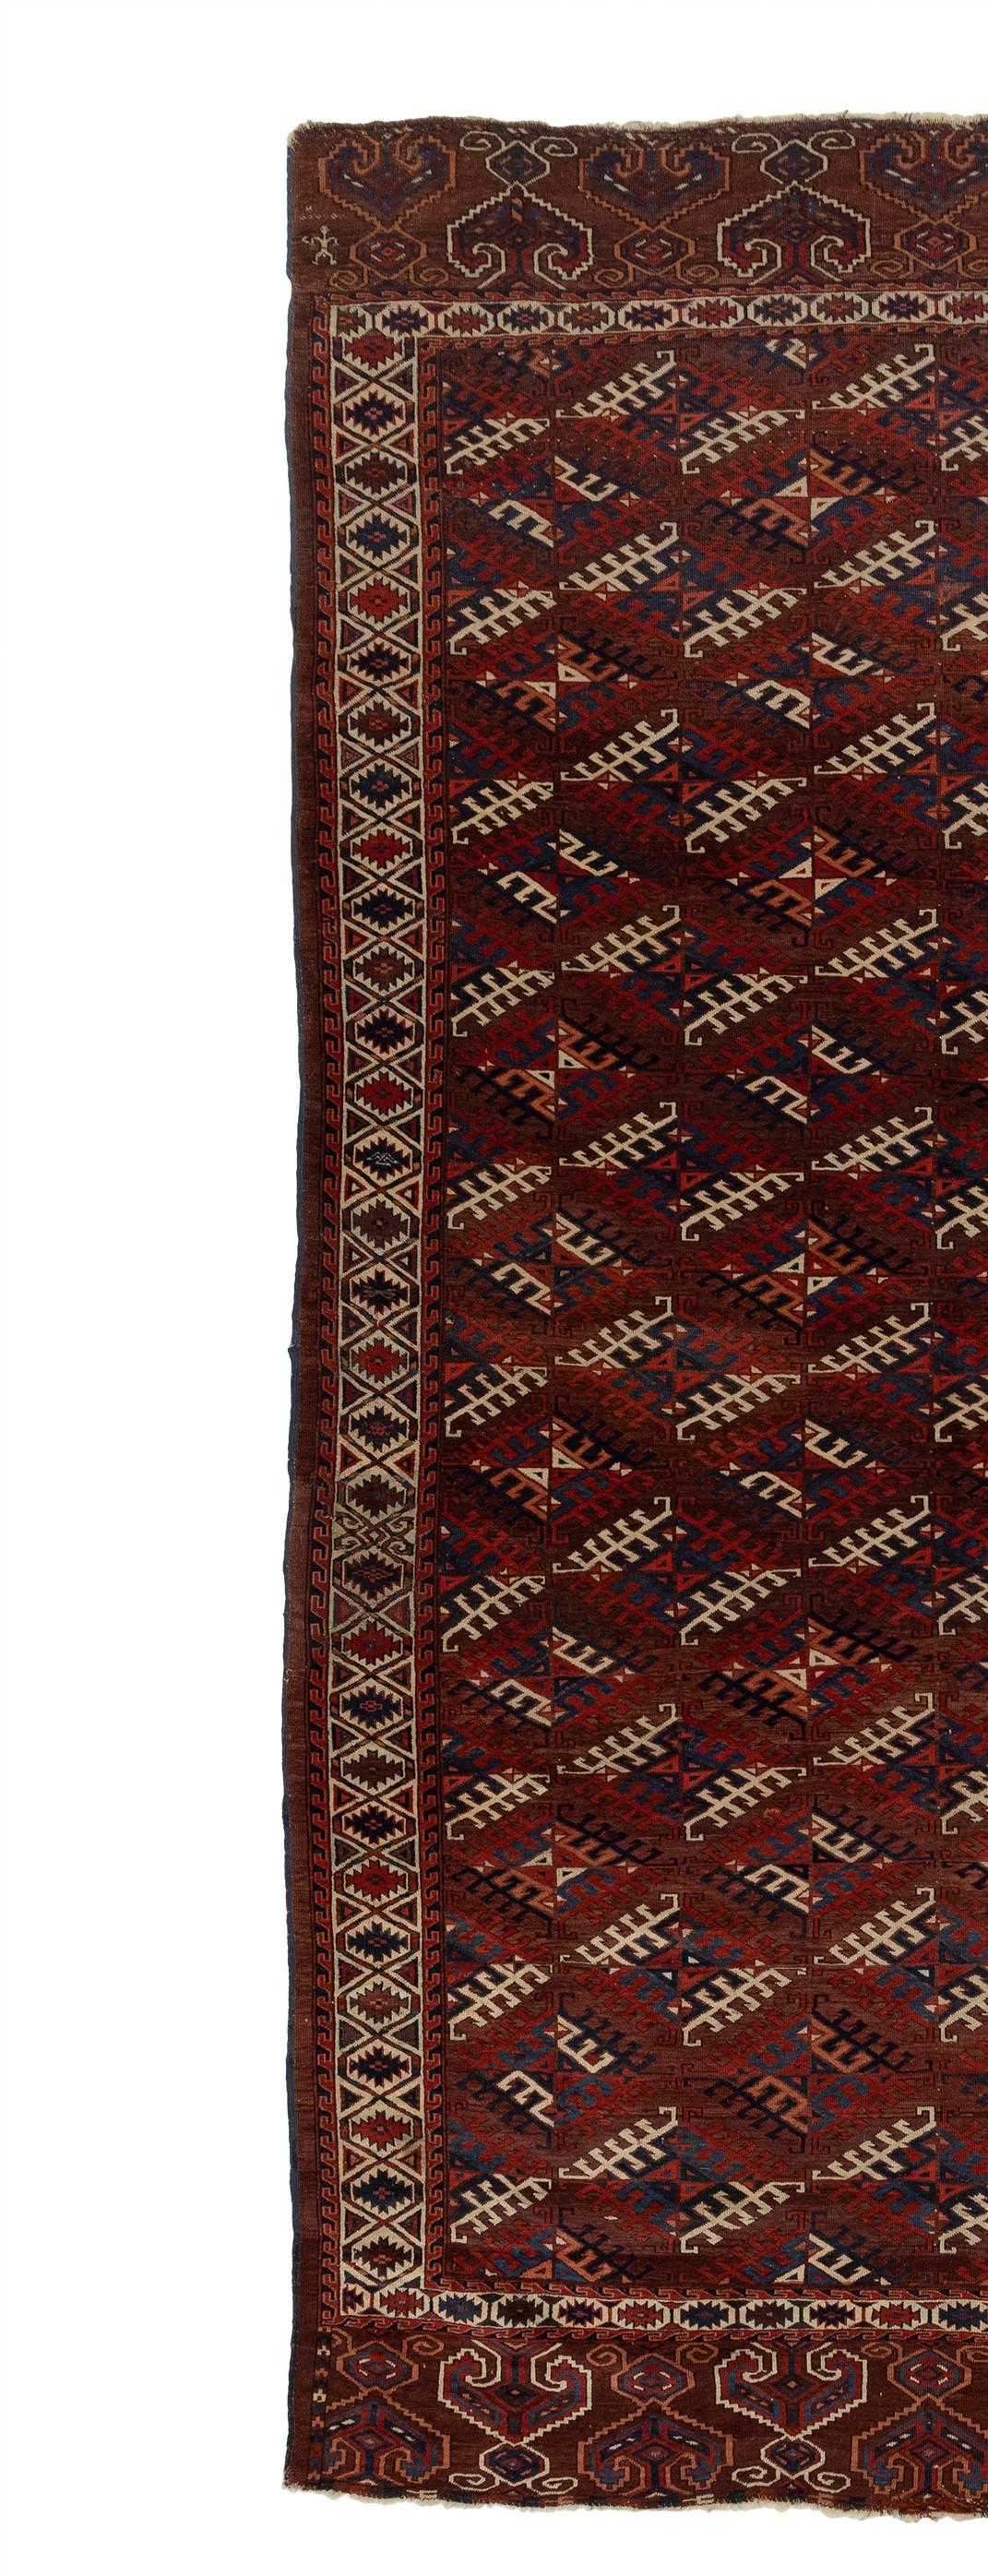 This exquisite antique Turkaman rug is truly a sight to behold. Expertly crafted in the 1850s, it boasts a number of distinctive element panels that are sure to catch the eye of any discerning collector. The strikingly rich red and brown background